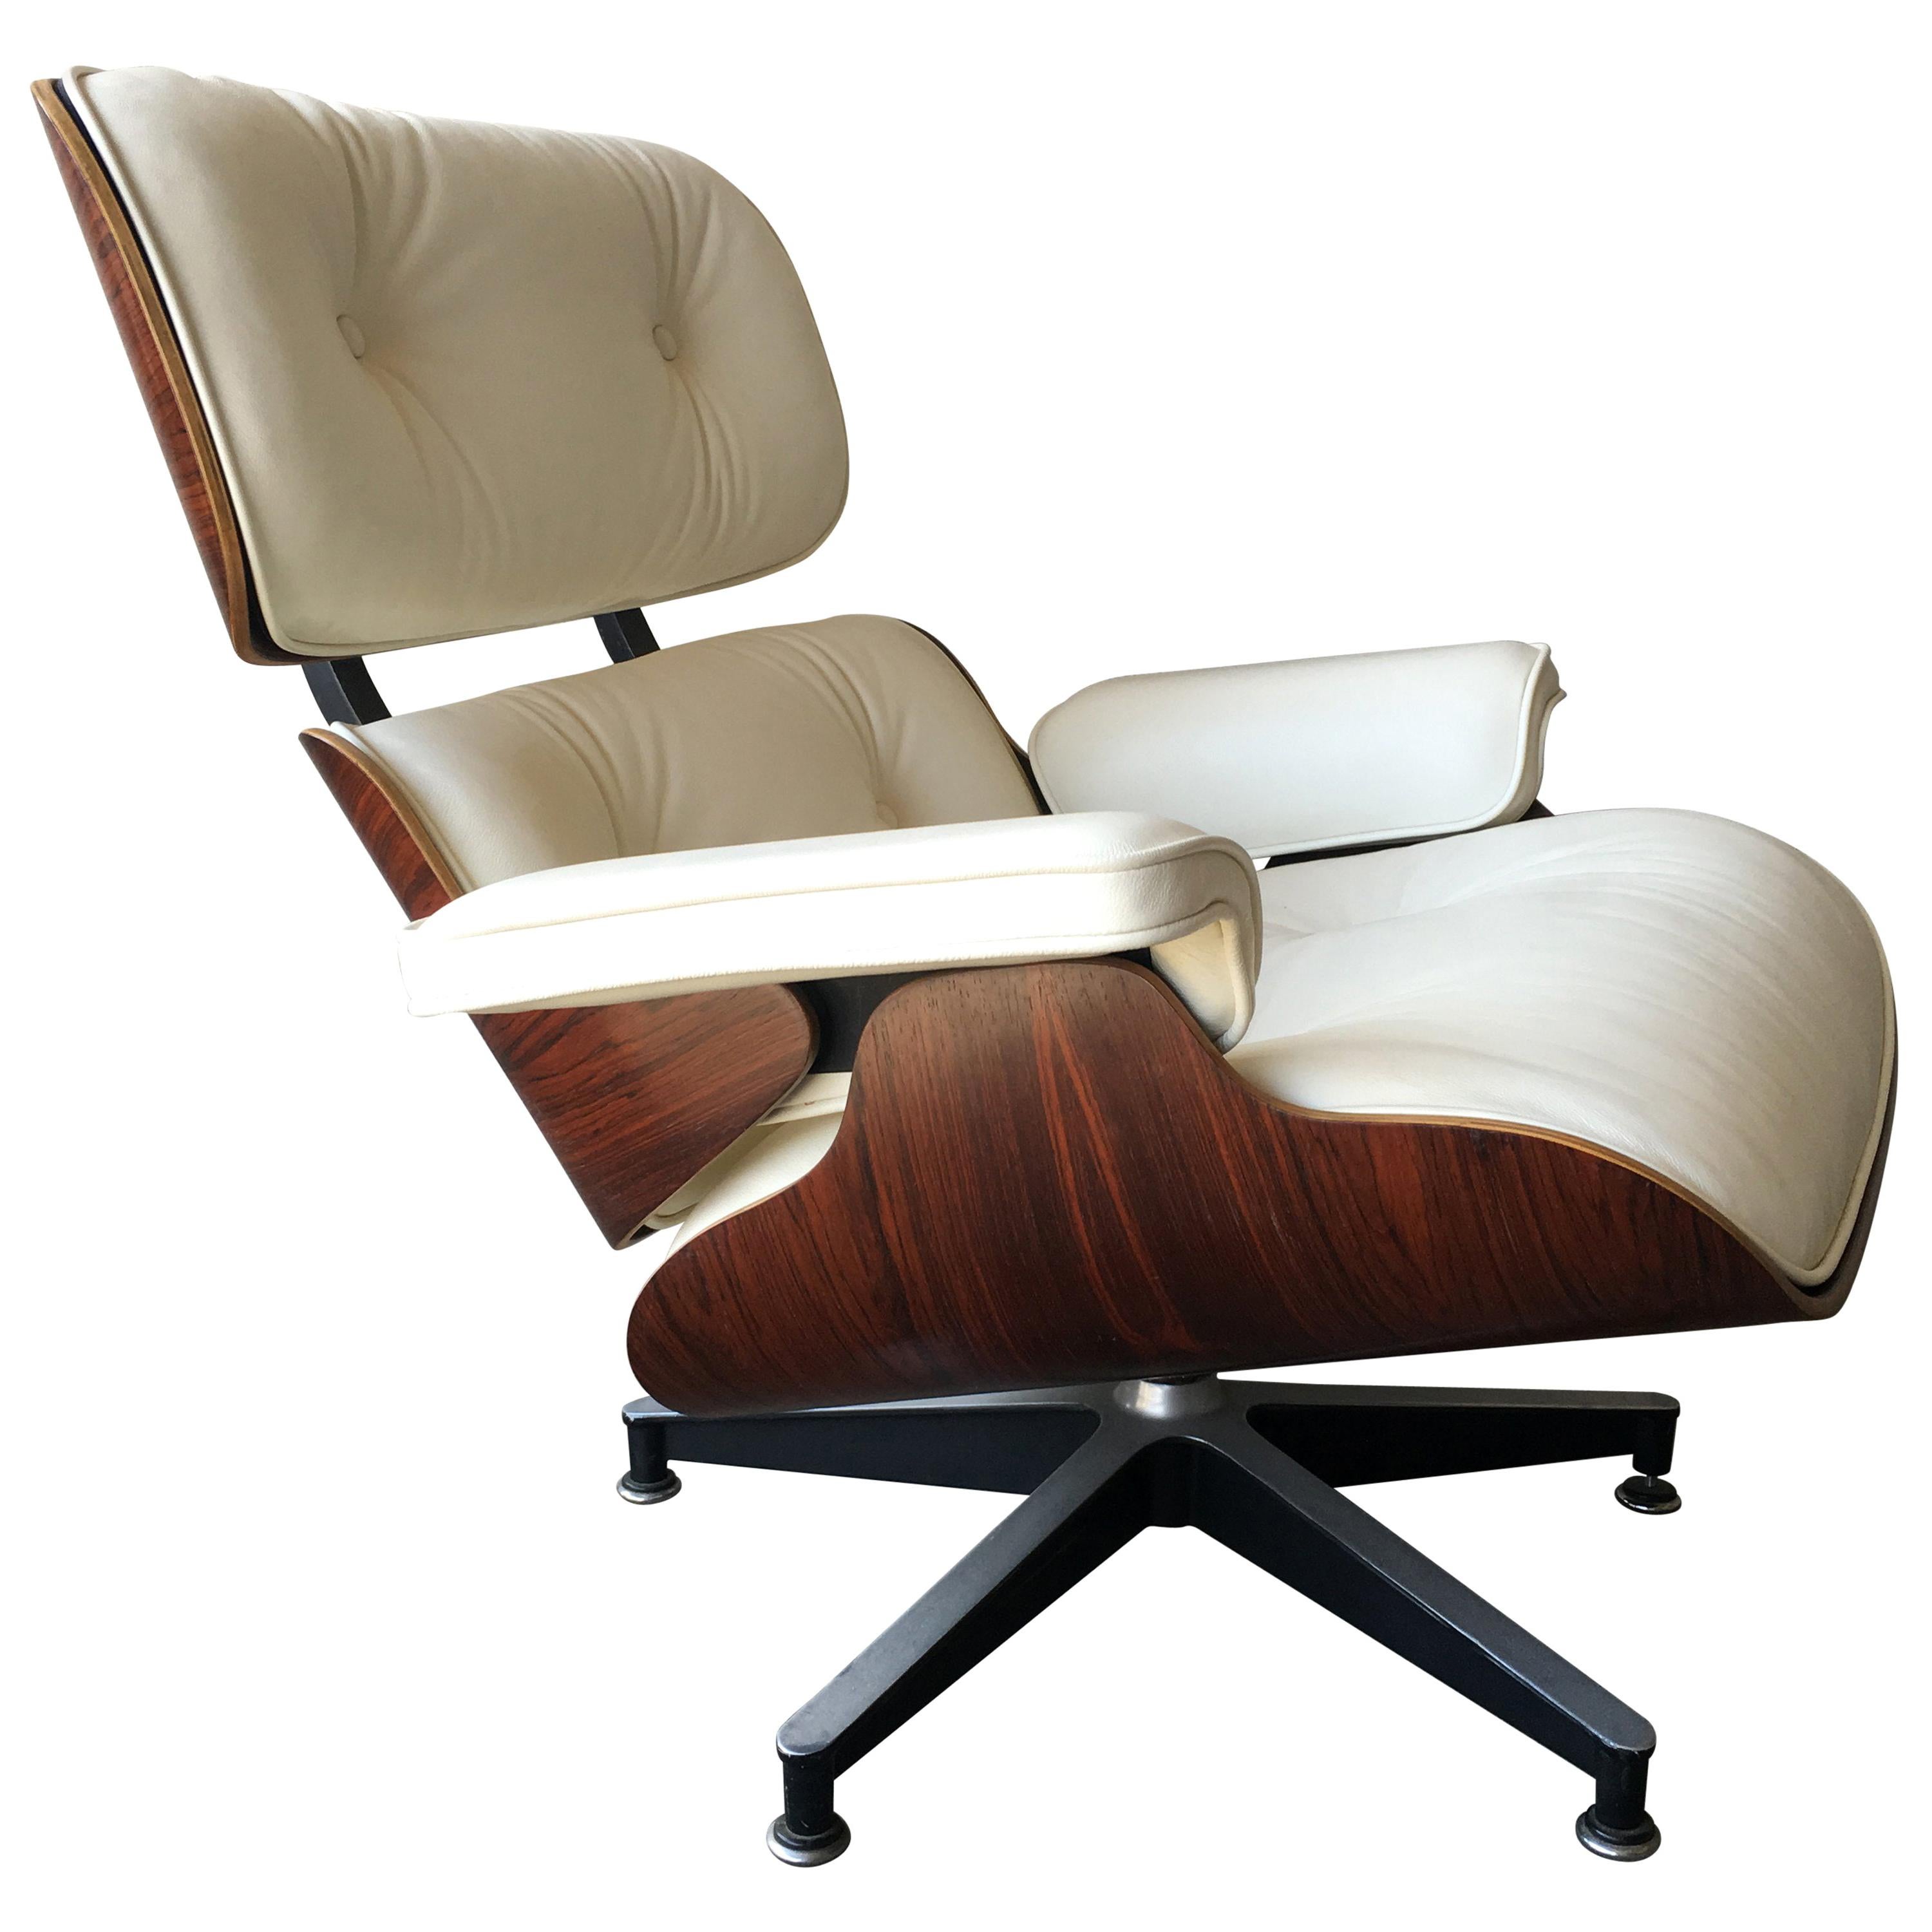 Herman Miller Eames Lounge Chair and Ottoman with New Ivory Leathe